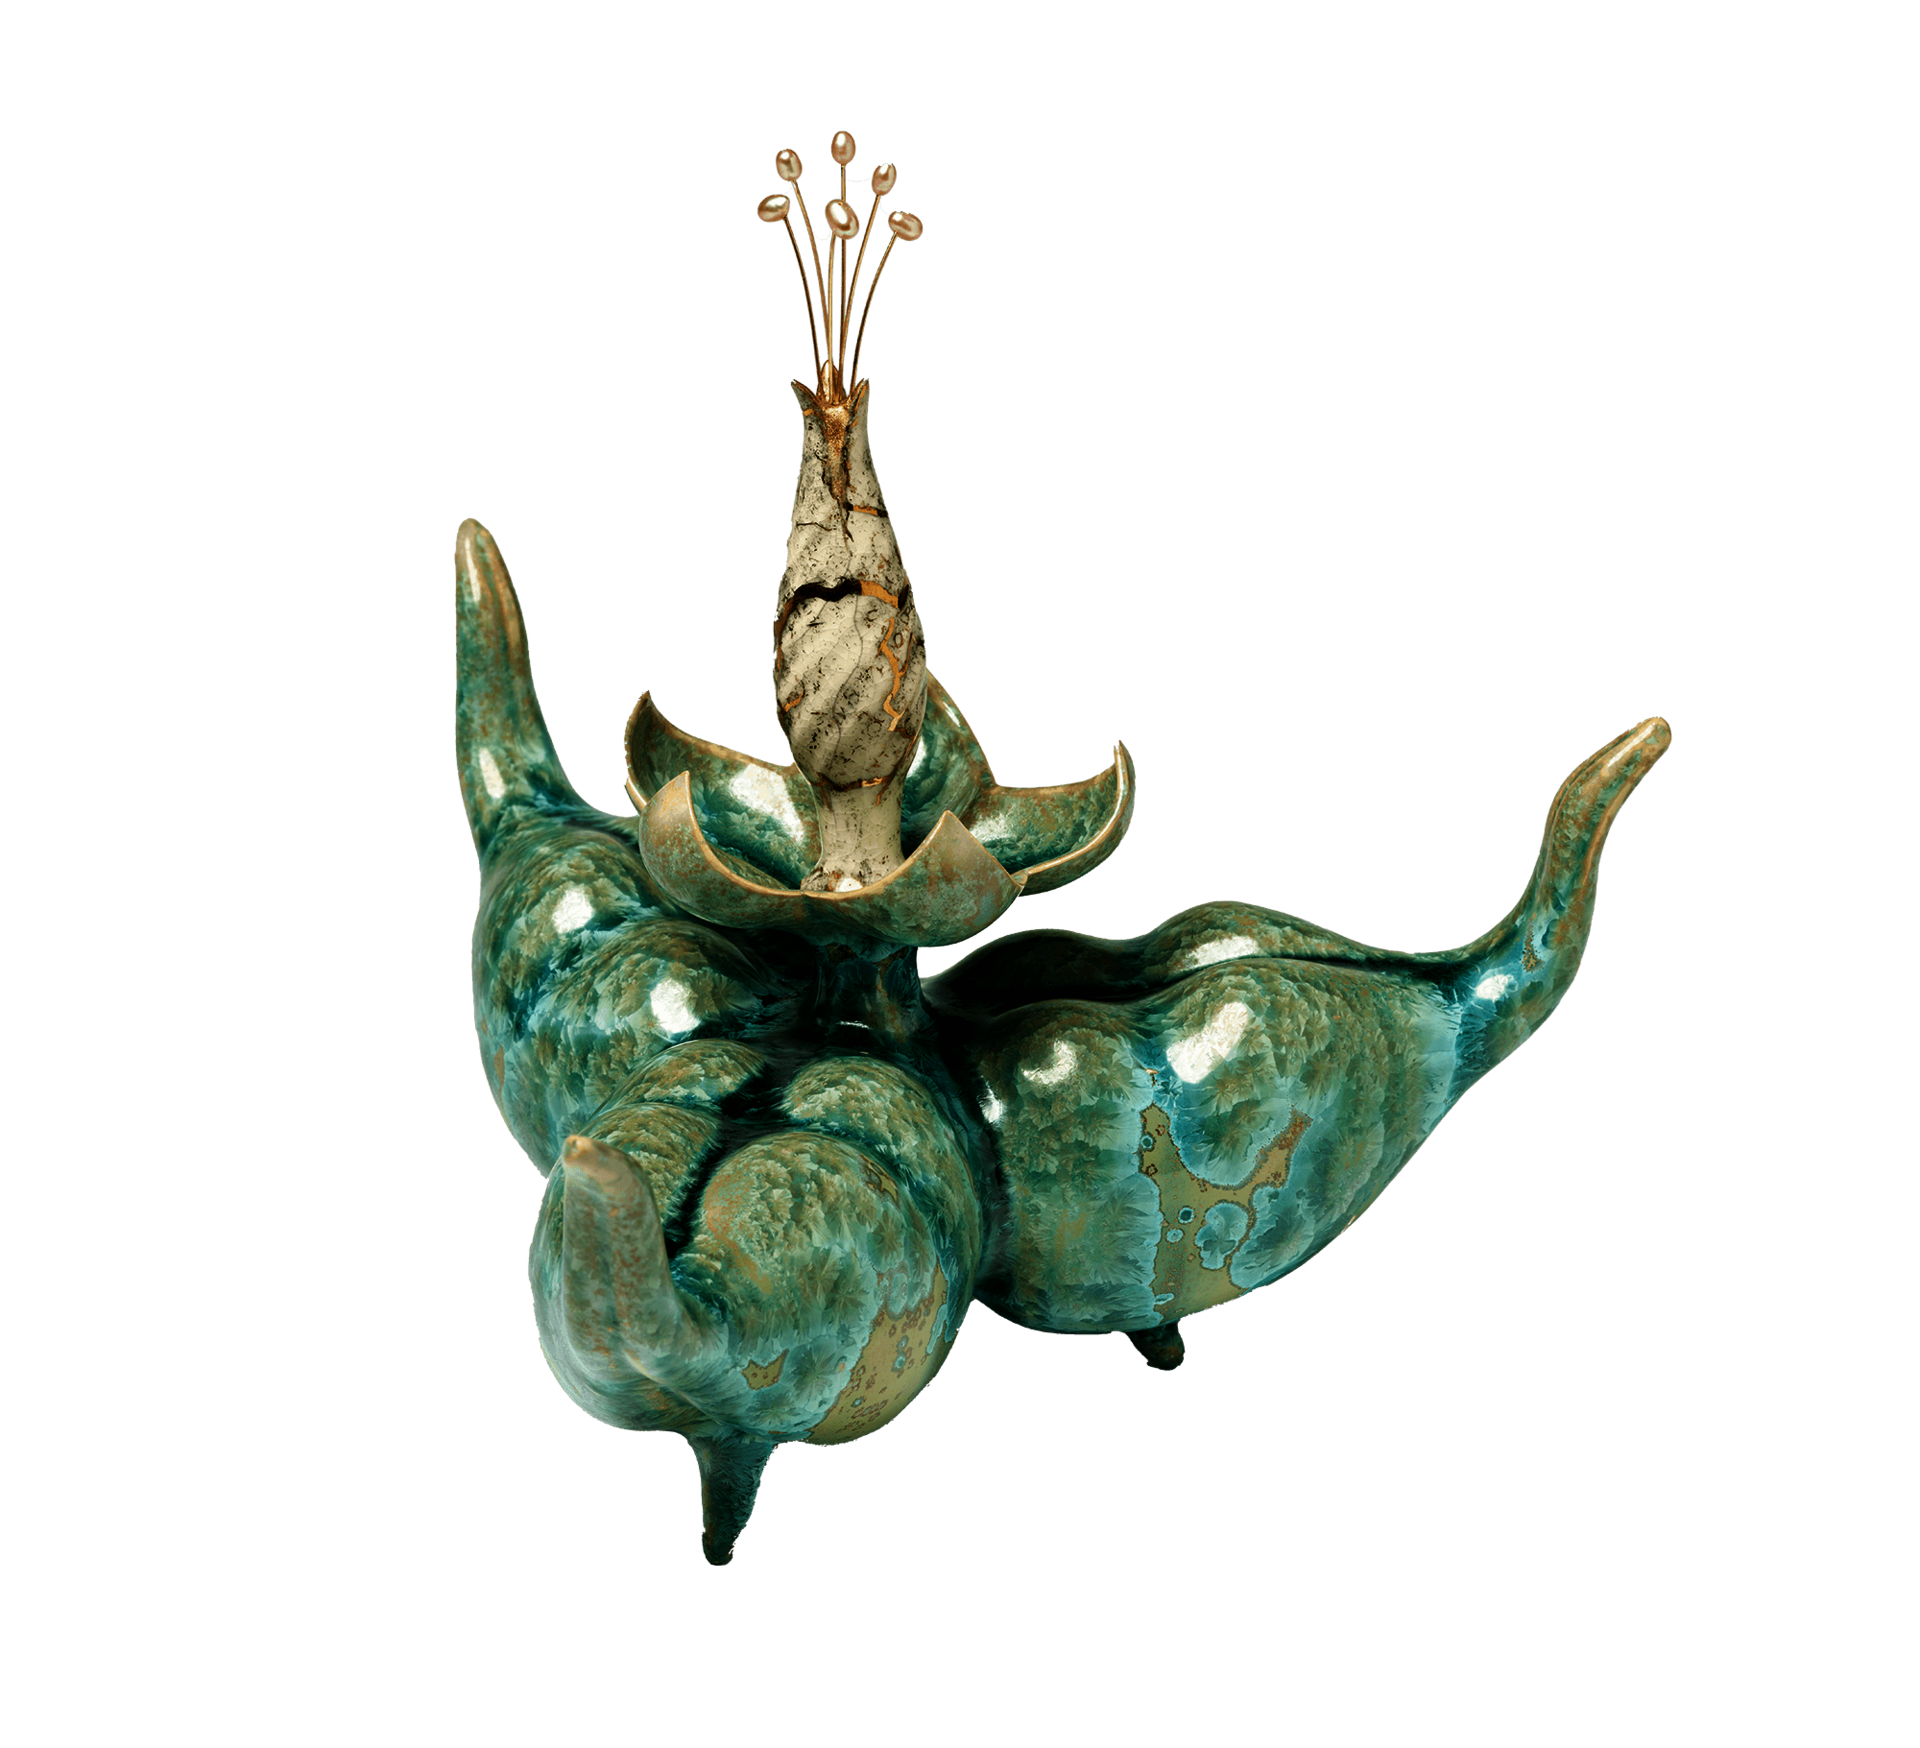 Porcelain bottle consisting of three large green lobes protruding from a flower that rises from the center